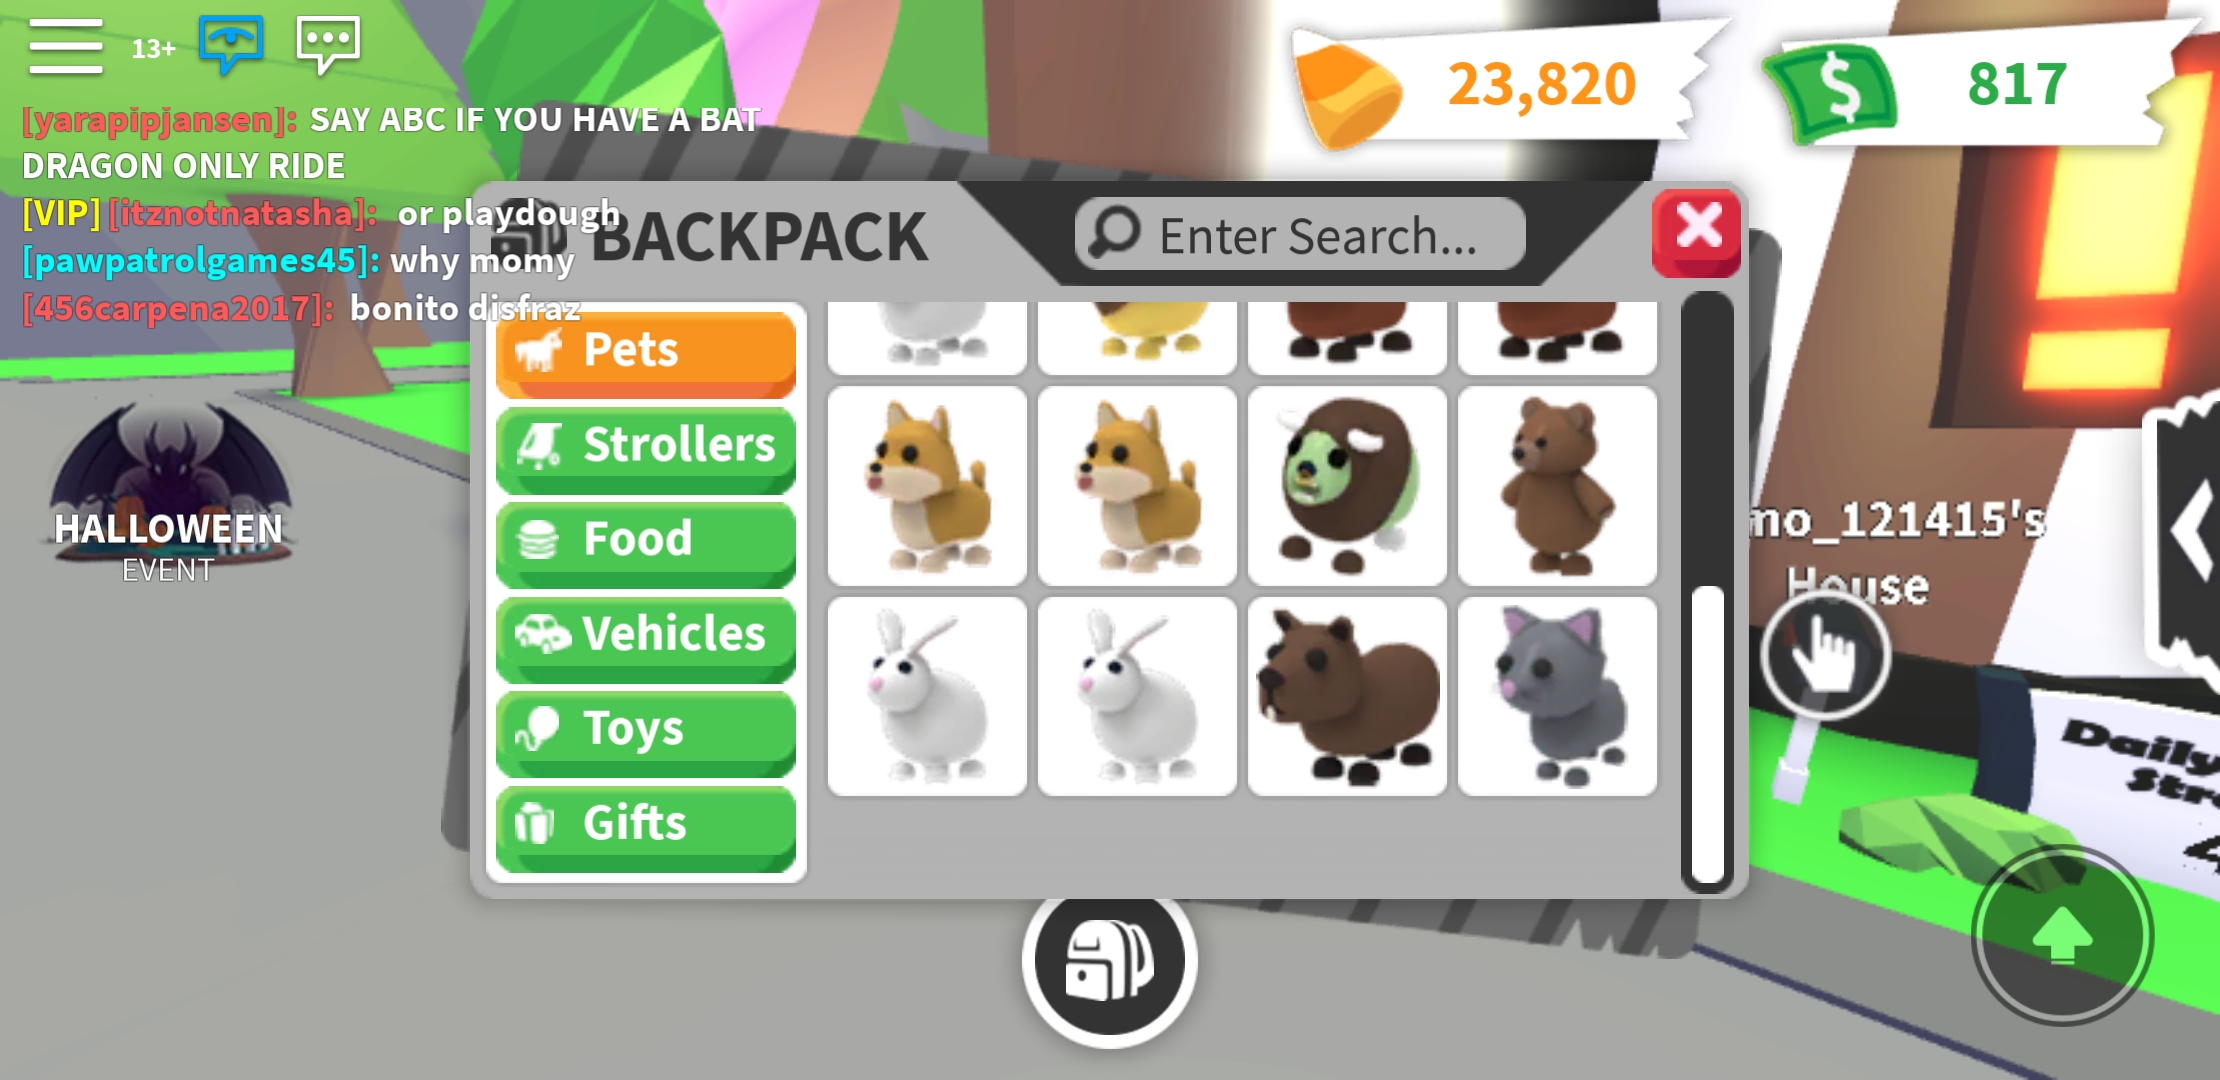 roblox adopt pets epicnpc inventory selling ride adoptme gift fandom cards gifts marketplace toys rich legendary feedback submit stand robux